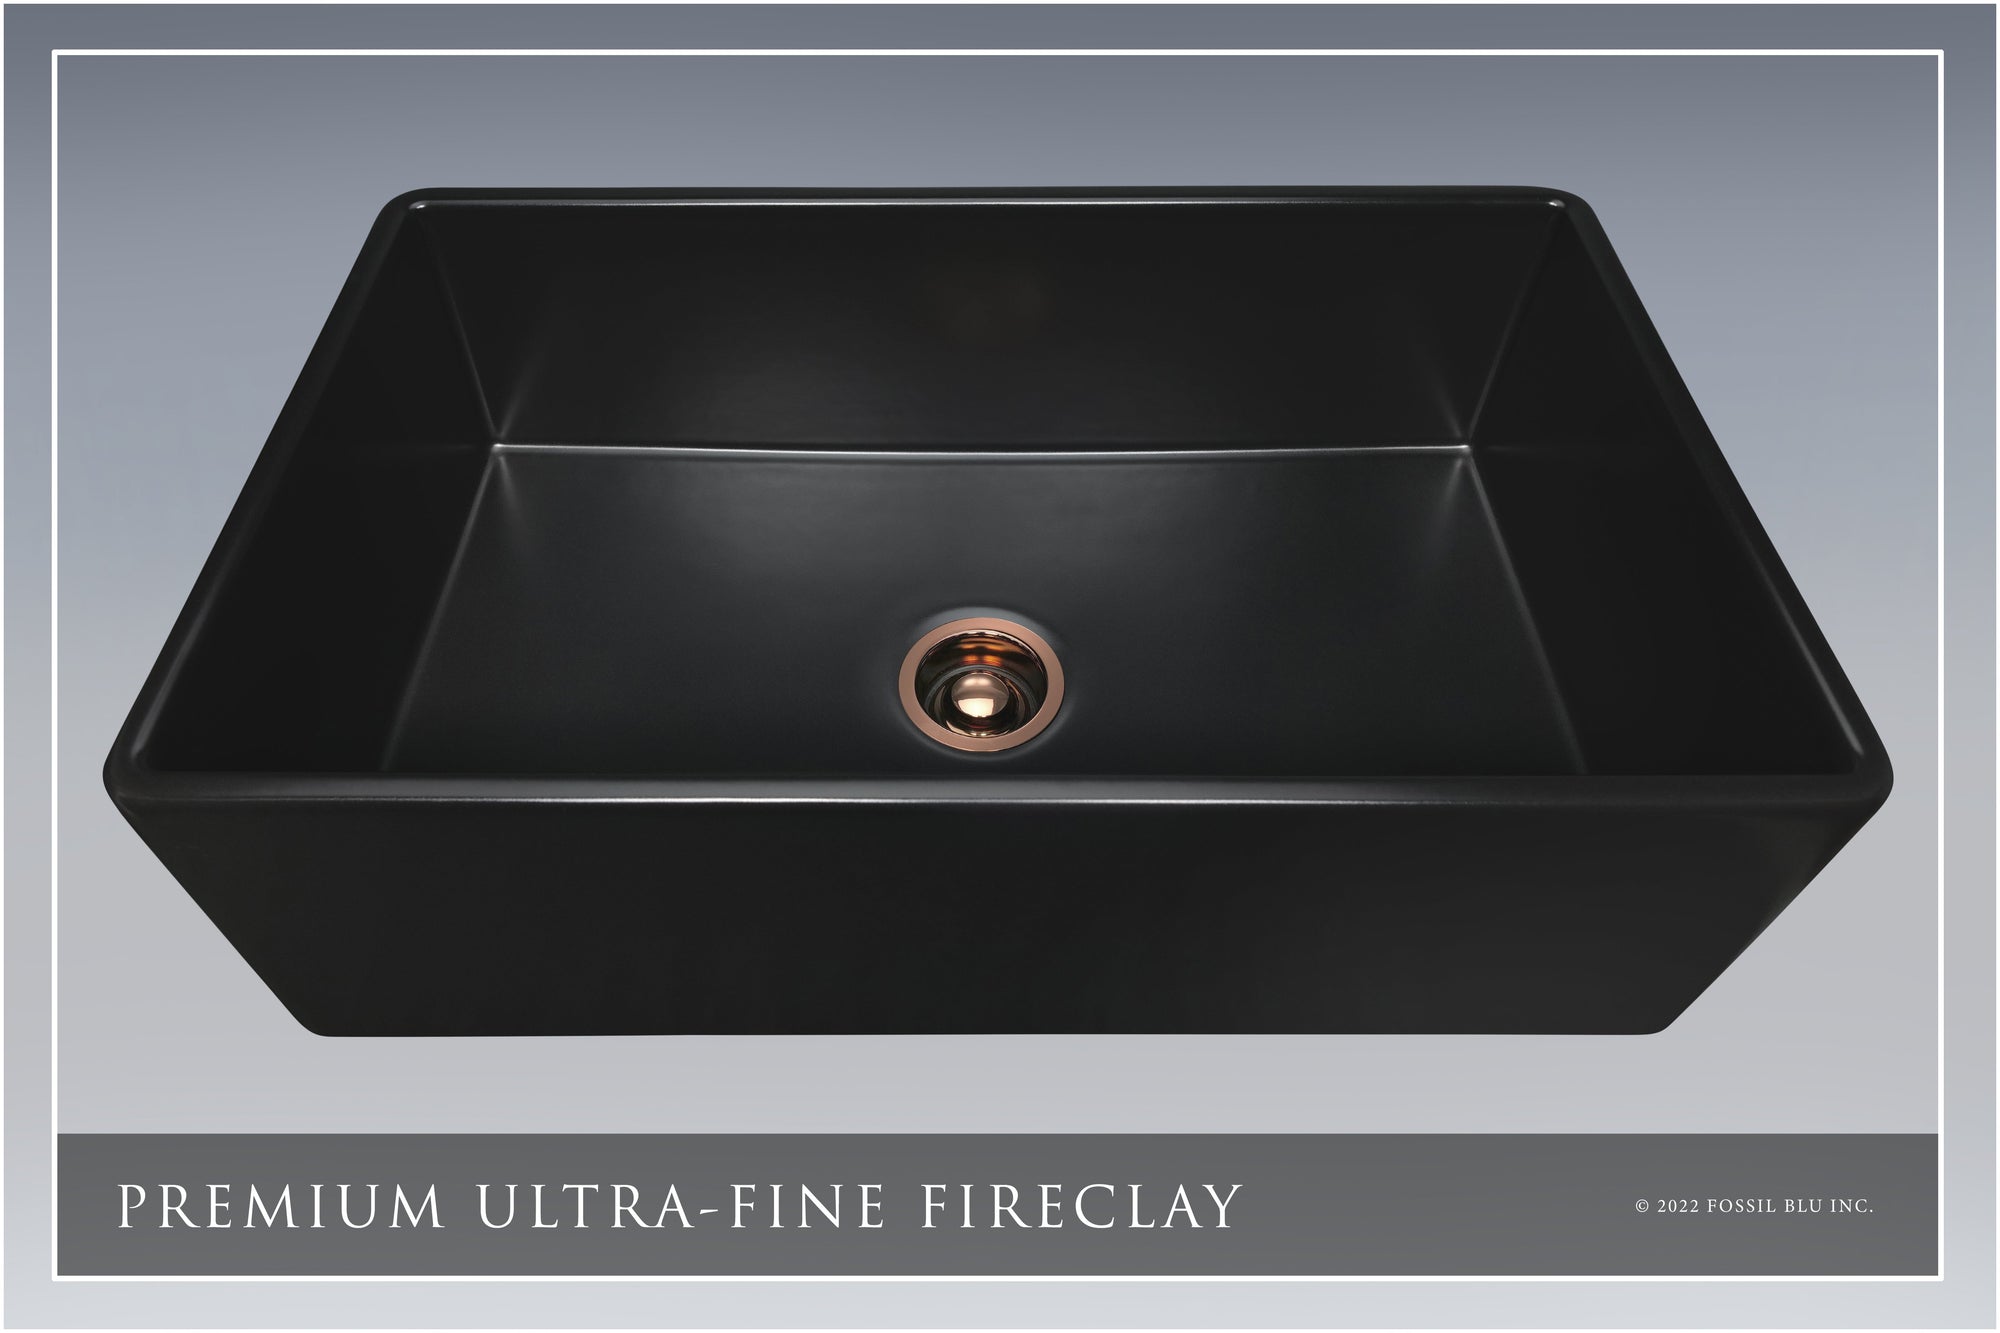 FSW1022RG LUX 33-INCH SOLID FIRECLAY FARMHOUSE SINK, MATTE BLACK, POL. ROSE GOLD ACCS, FLAT FRONT